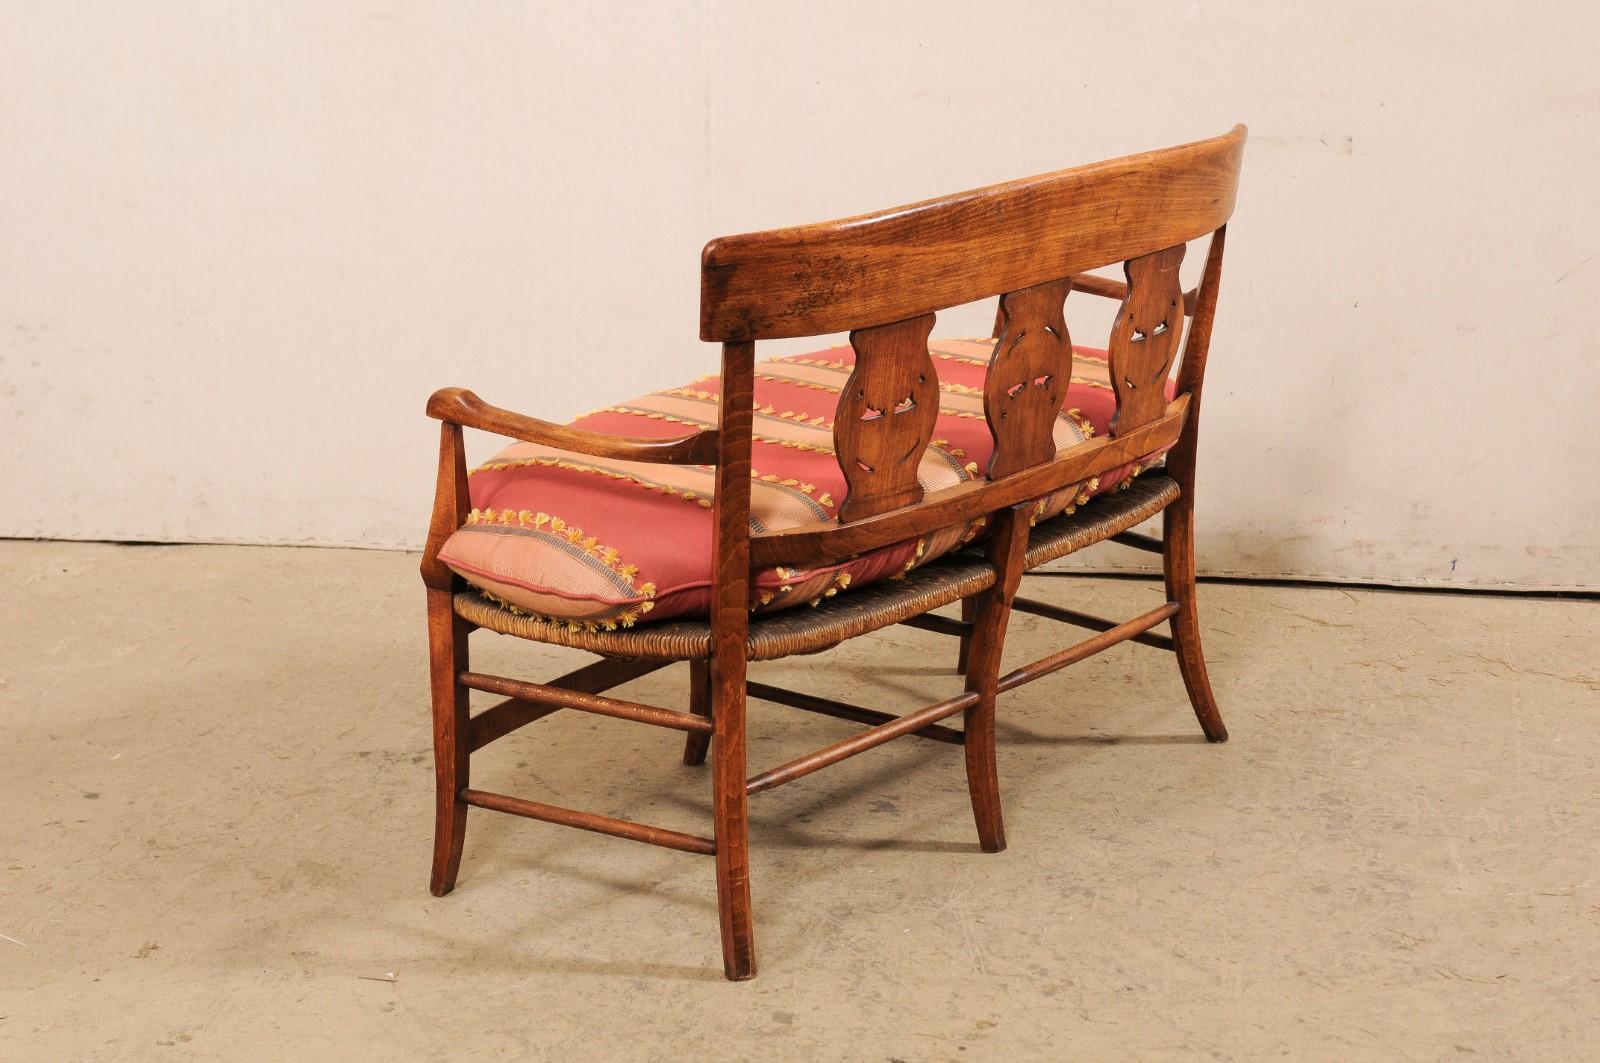 Upholstery French Country Bench W/Neoclassic Elements Has Rushed Seat & Upholstered Cushion